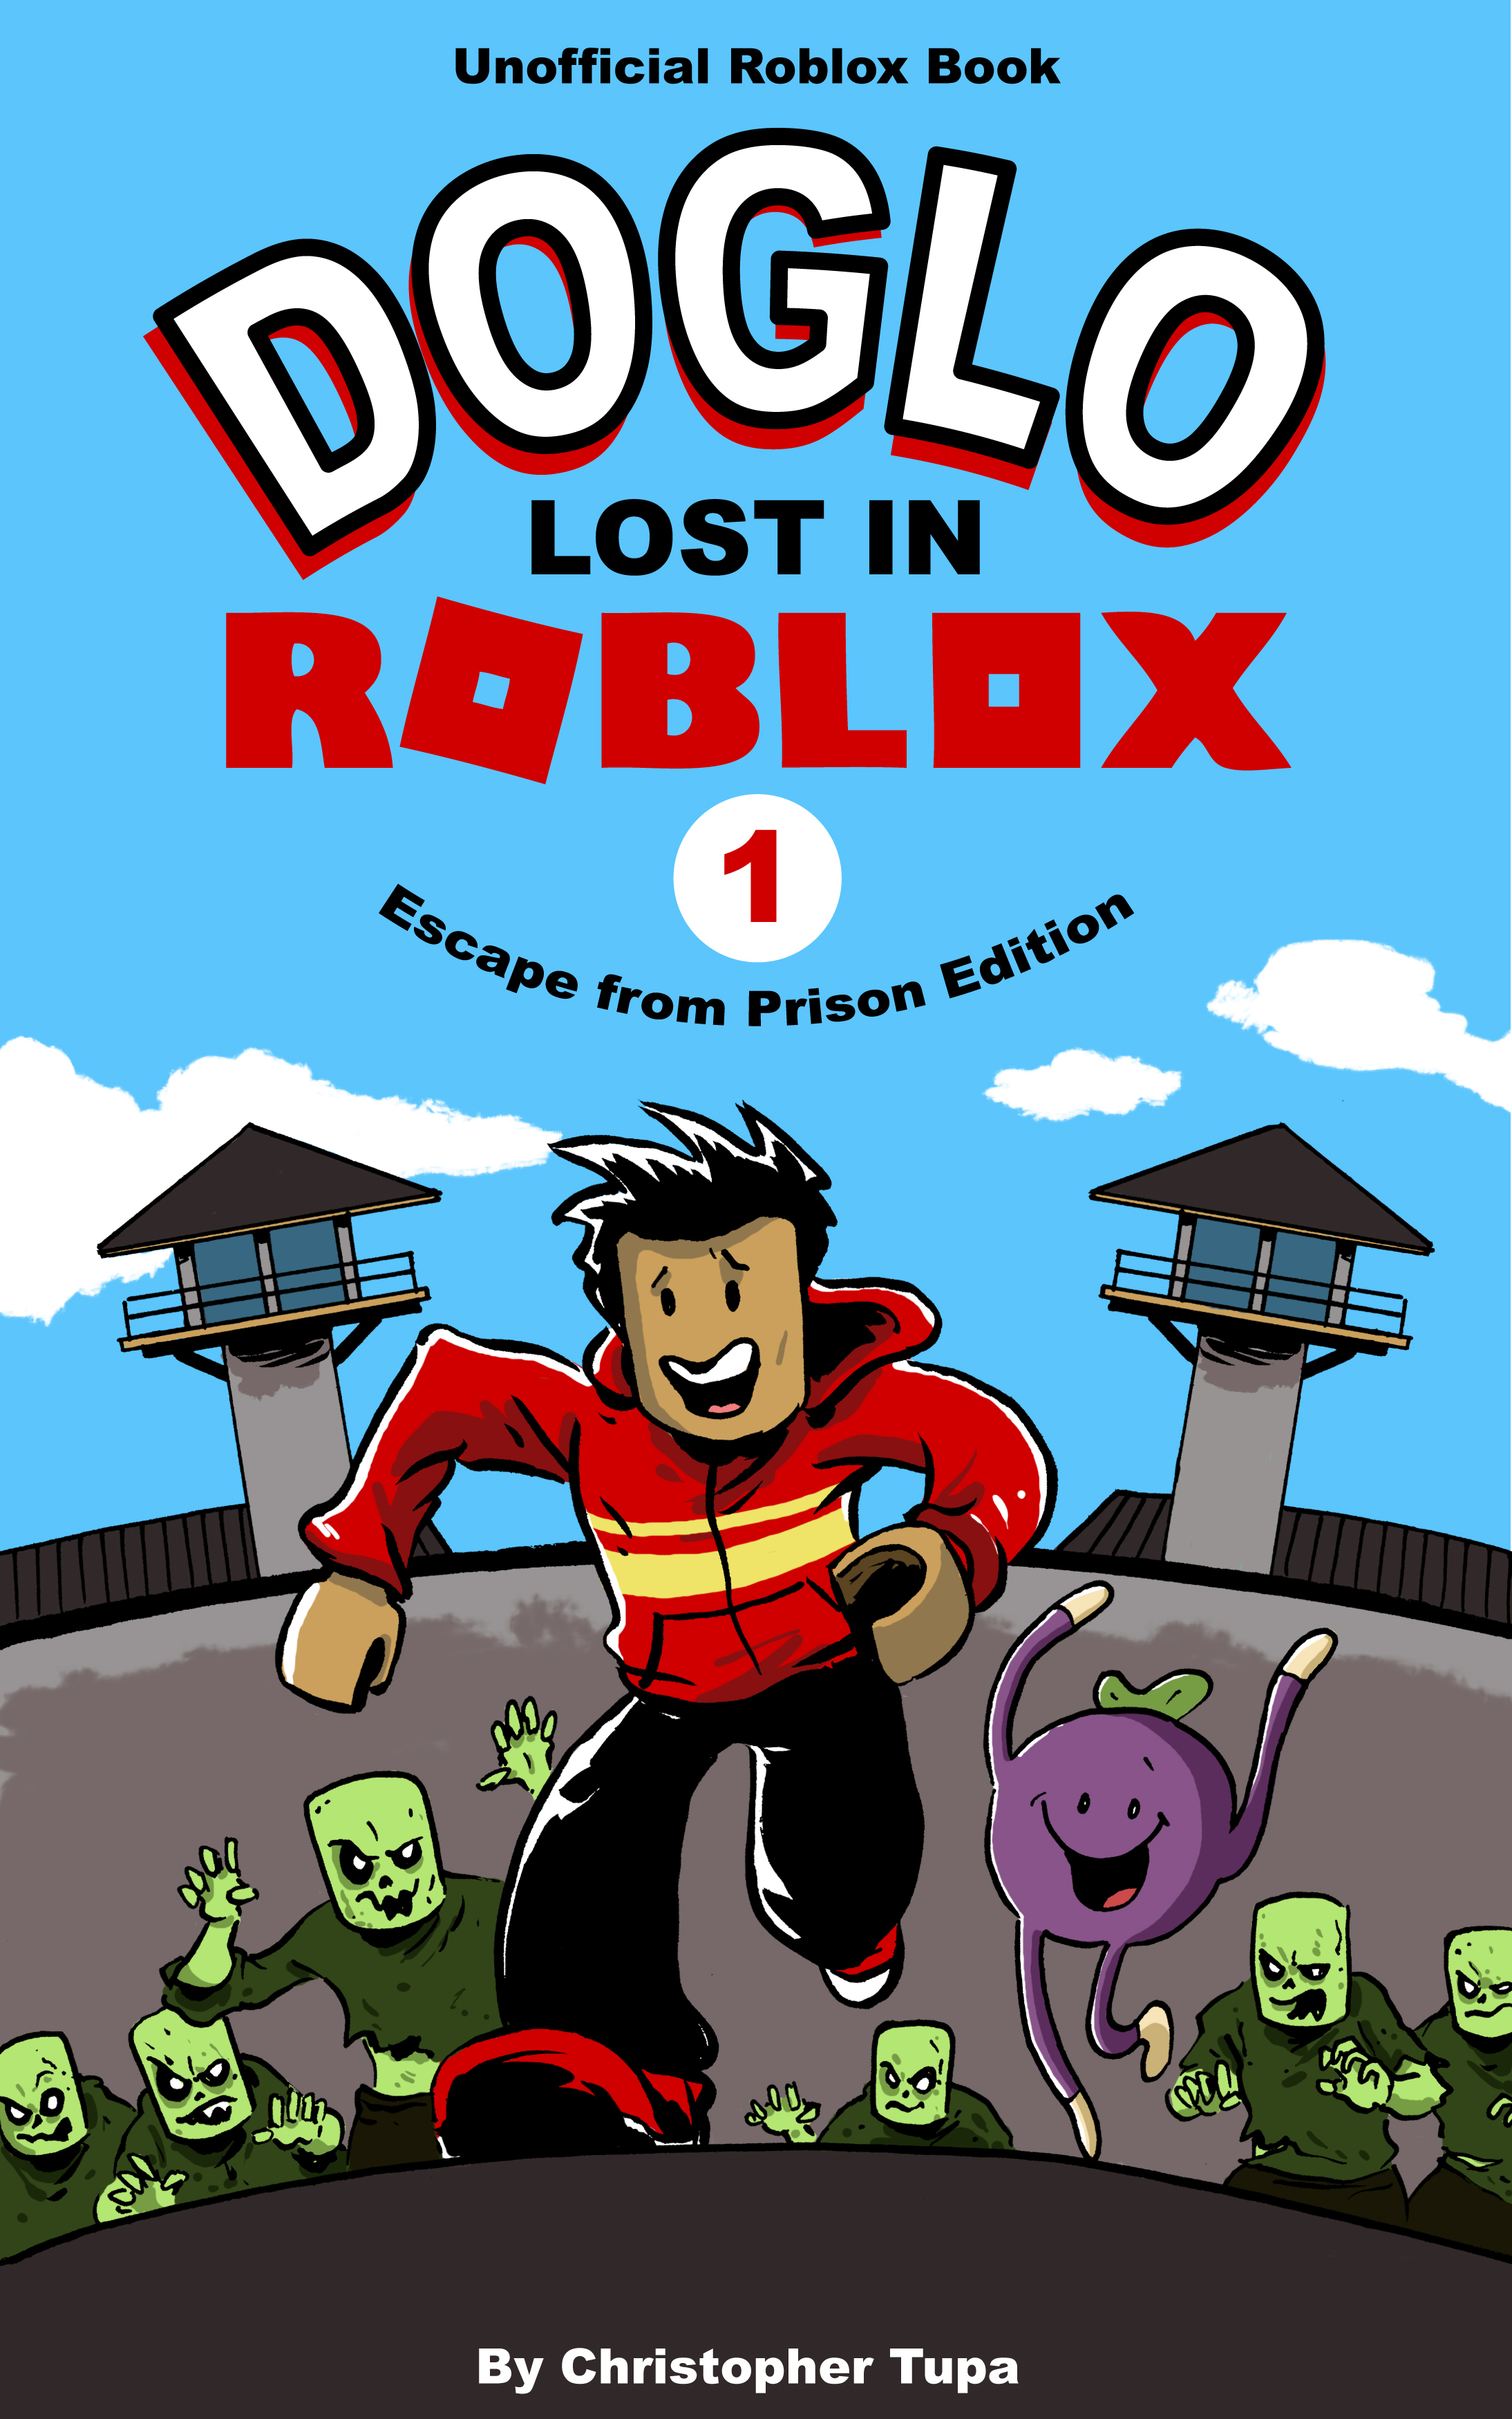 Doglo Lost In Roblox Escape From Prison Edition An Ebook By Christopher Tupa - roblox link to animations catalog